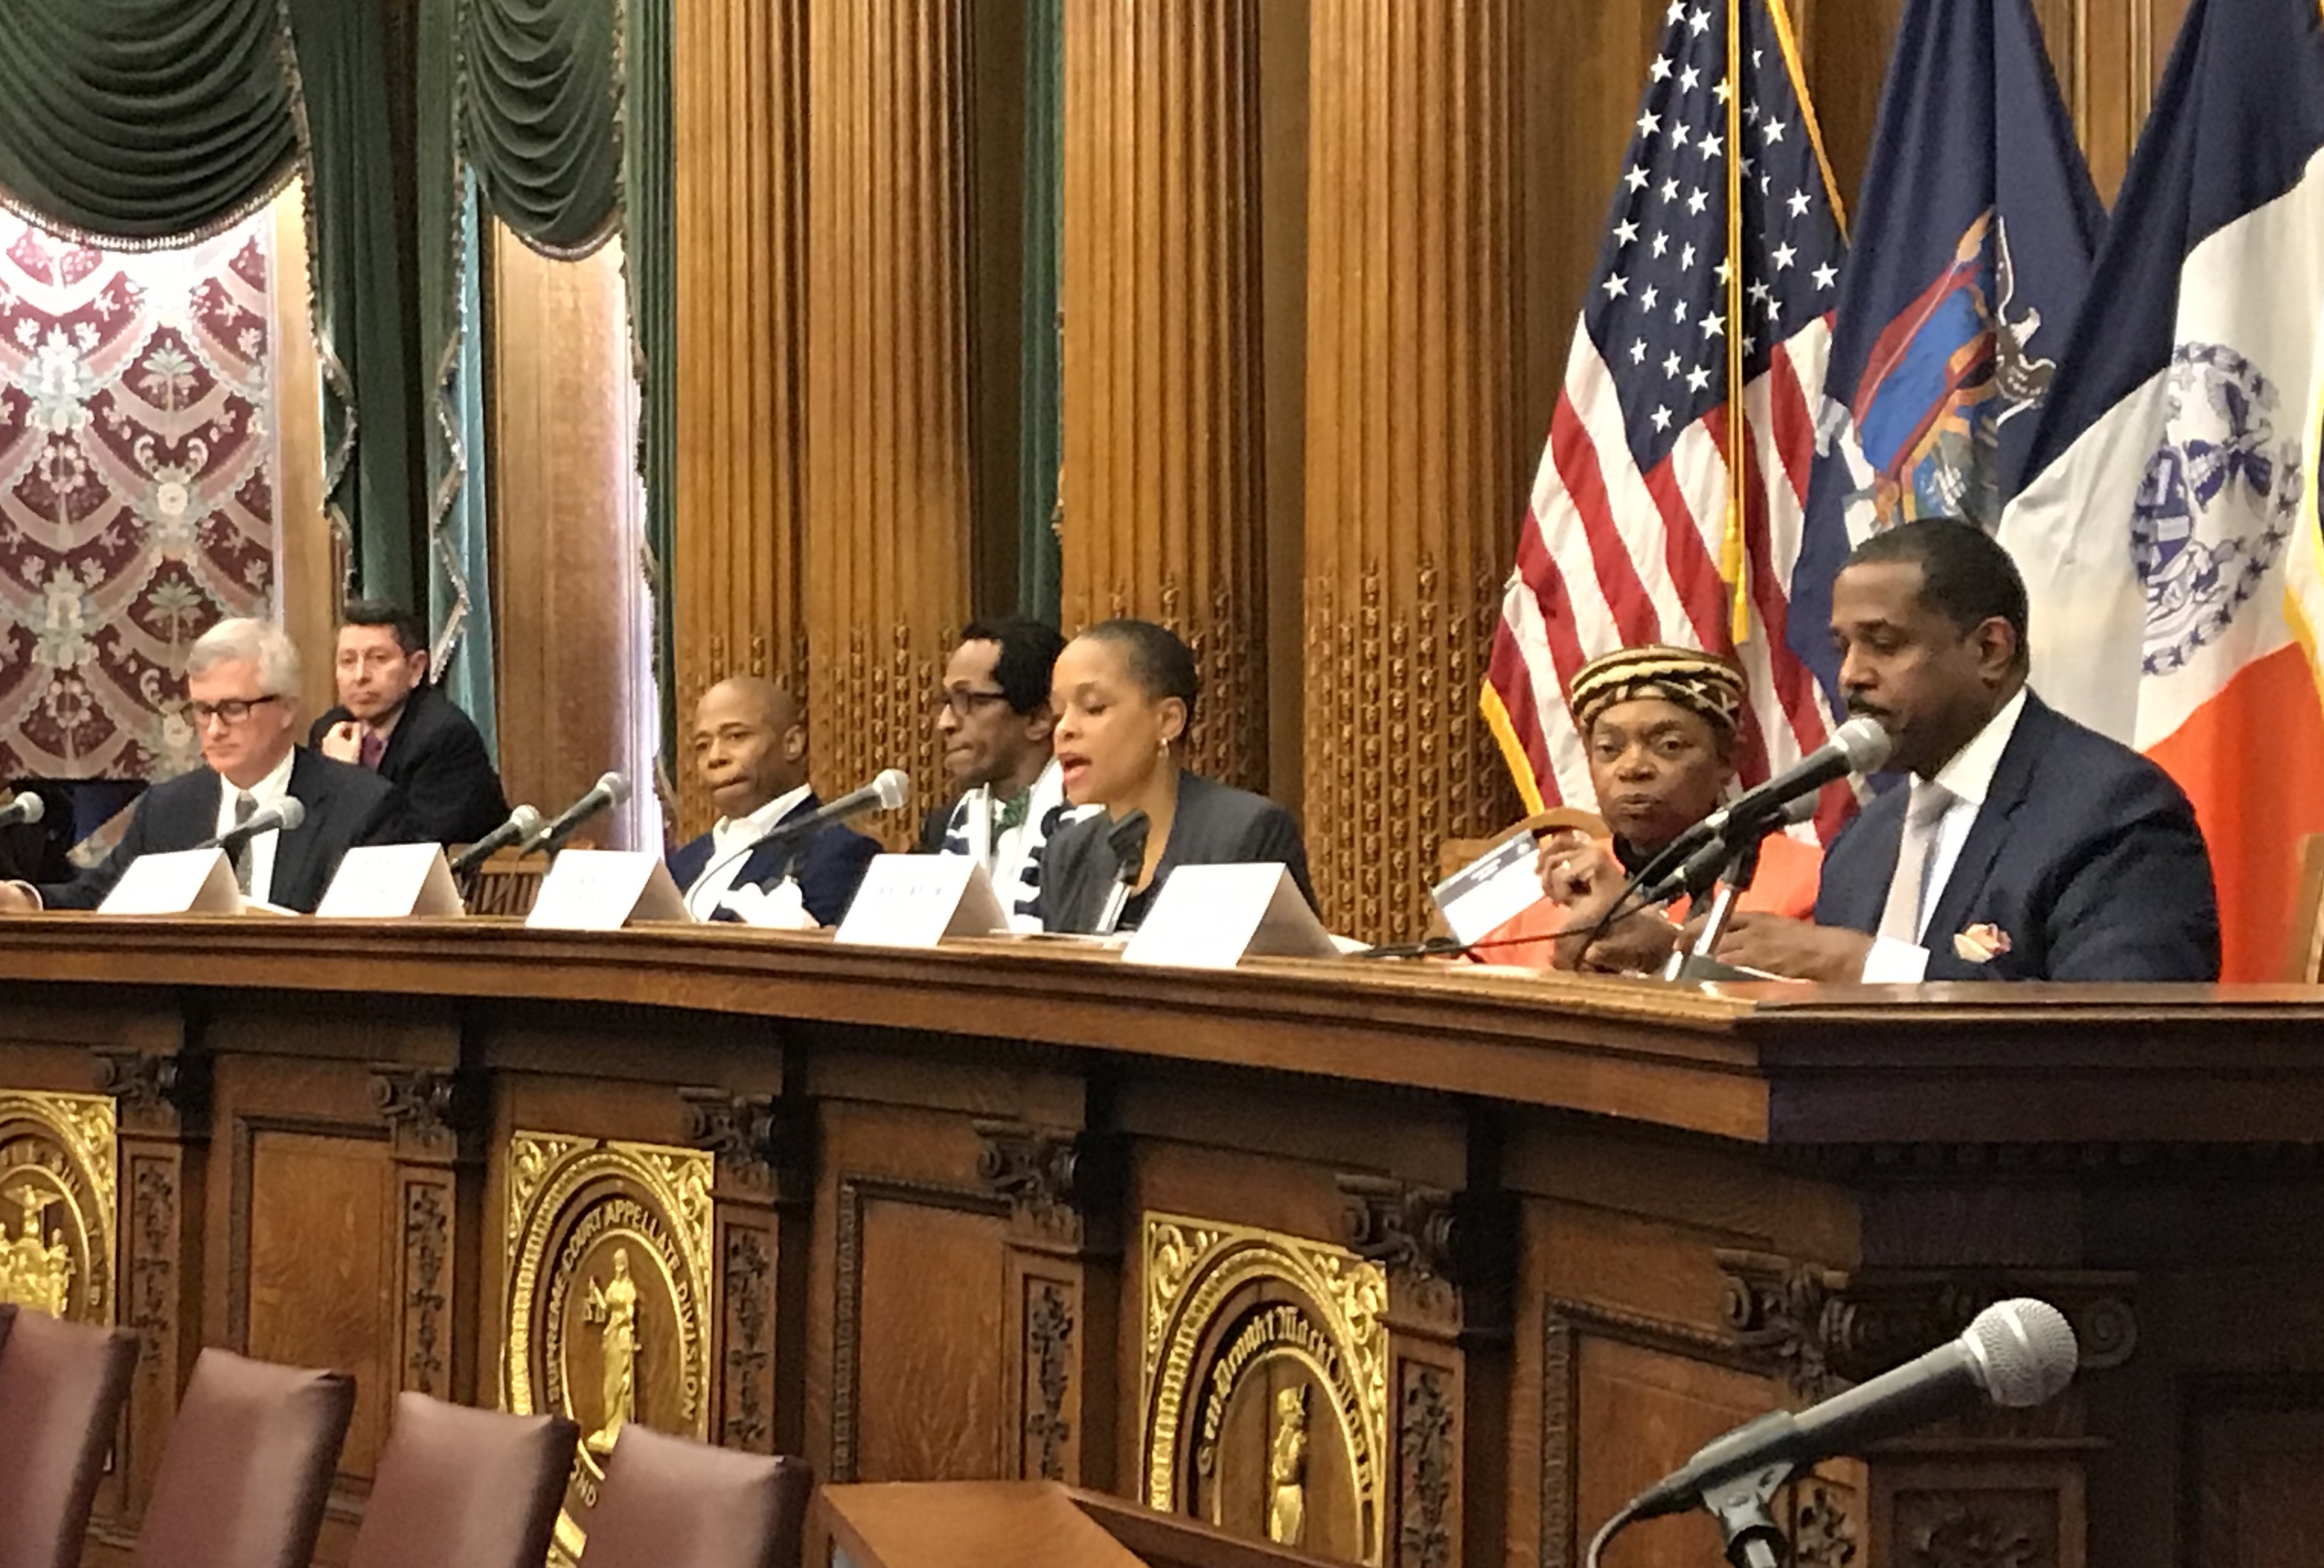 Brooklyn Borough President Eric Adams (third from left), Assemblymember Tremaine Wright (center, speaking) and State Senator Velmanette Montgomery (sixth from left) sponsored a packed hearing on the housing theft crisis in Brooklyn. Eagle photo by Mary Frost.